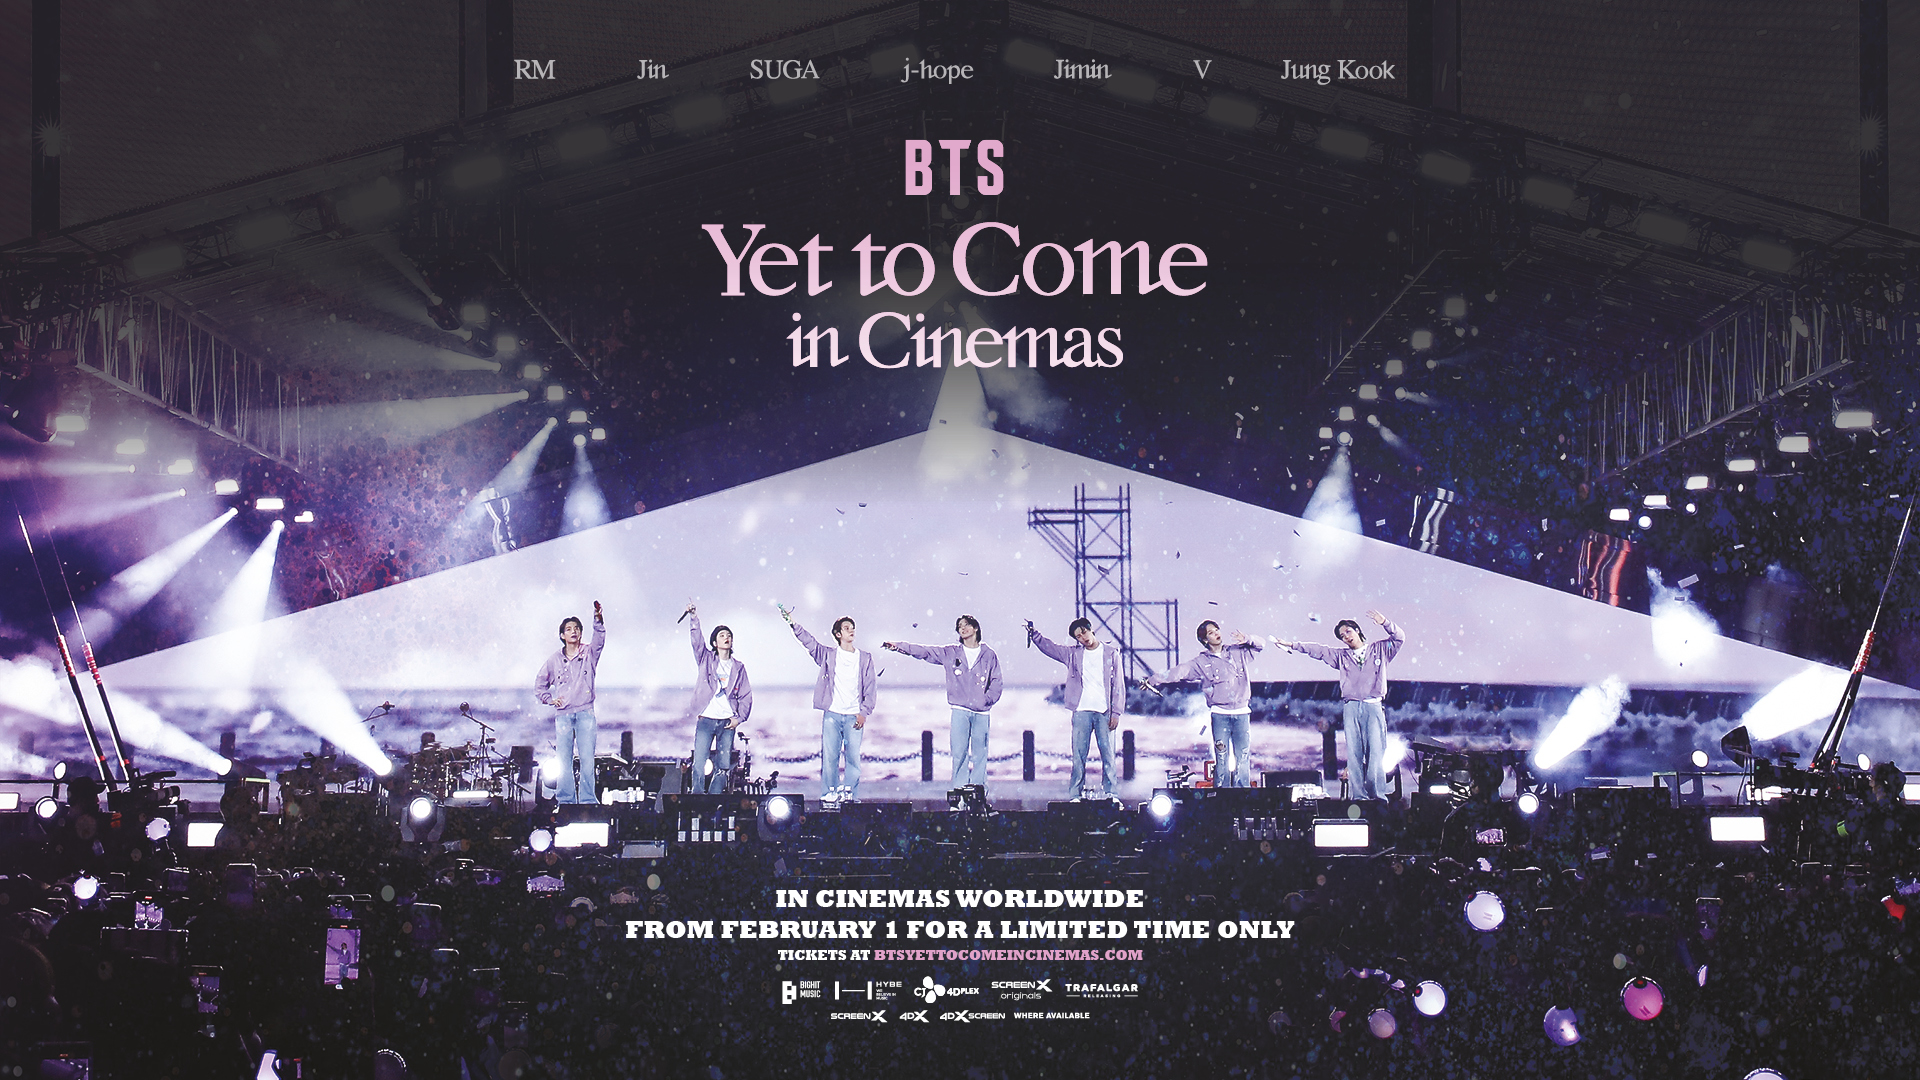 BTS: Yet to Come in Cinemas backdrop